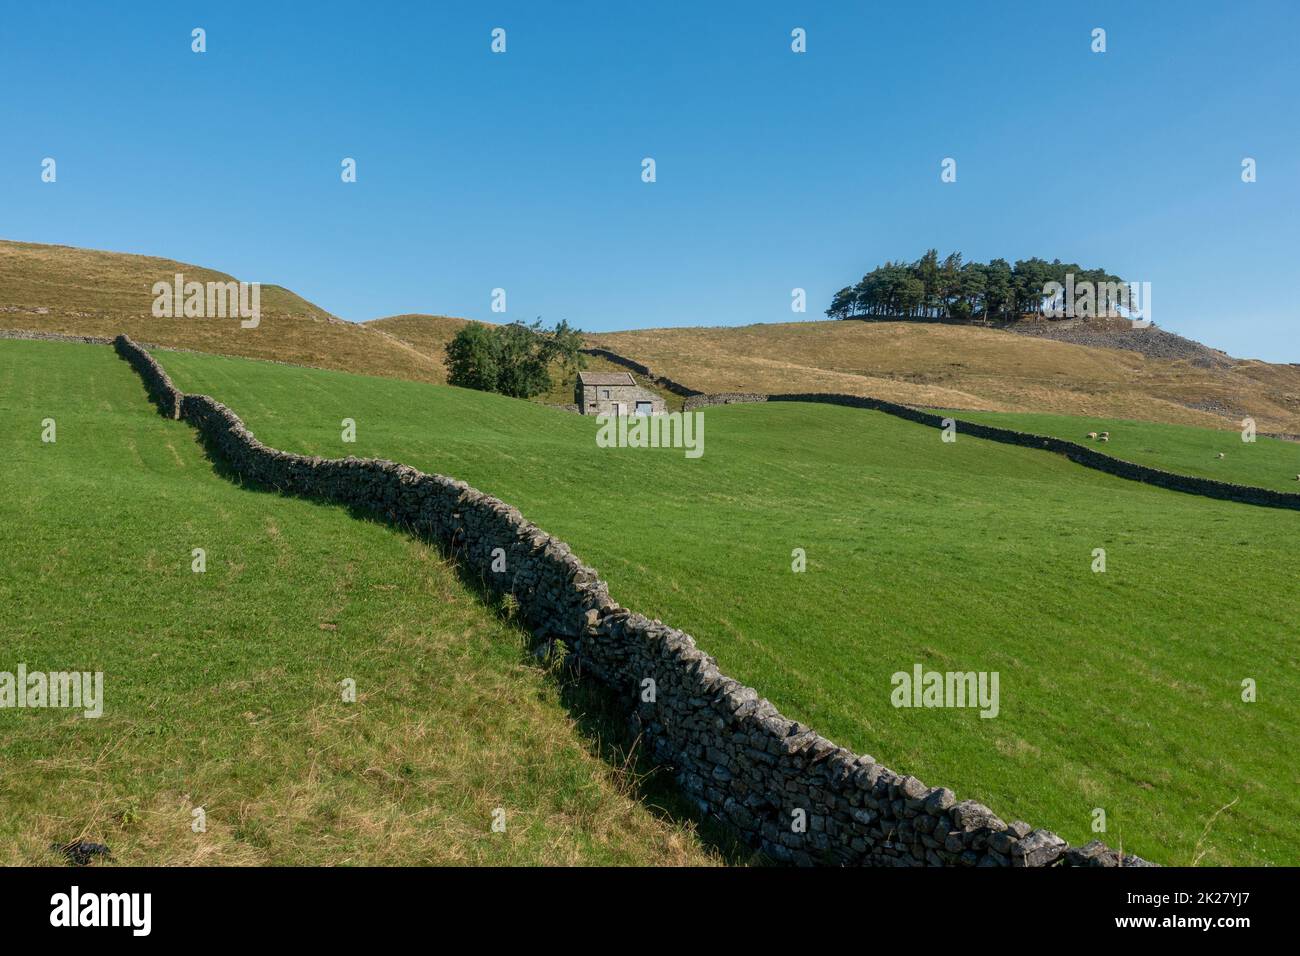 Stunning countryside view with old stone barn and drystone walls, near Brough, North Pennines, Cumbria, England, UK Stock Photo